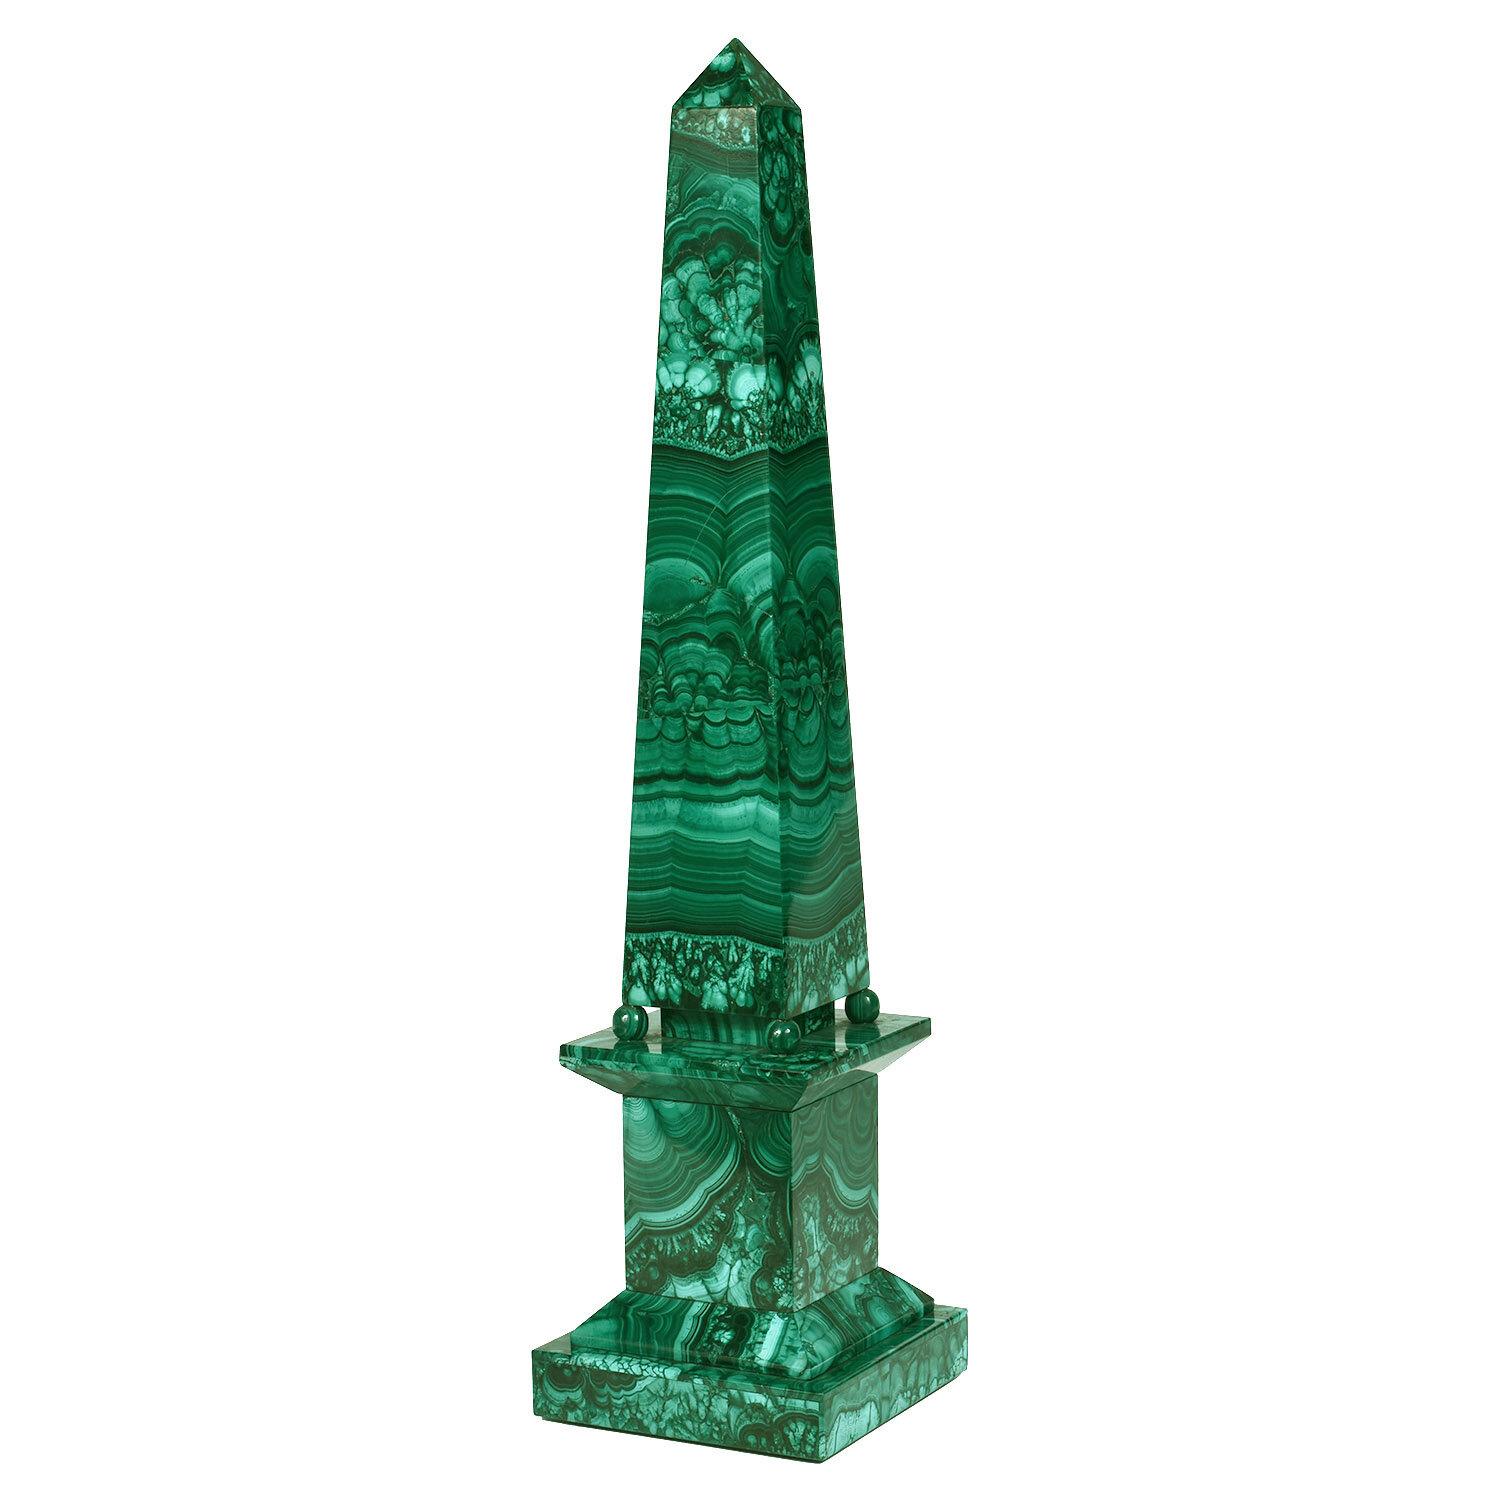 This one-of-a-kind malachite obelisk is one of the best I have come across, with pleasing proportions, a regal design, and a degree of complexity requiring greater skill and precision to achieve than most. Plus, the naturally beautiful materials are